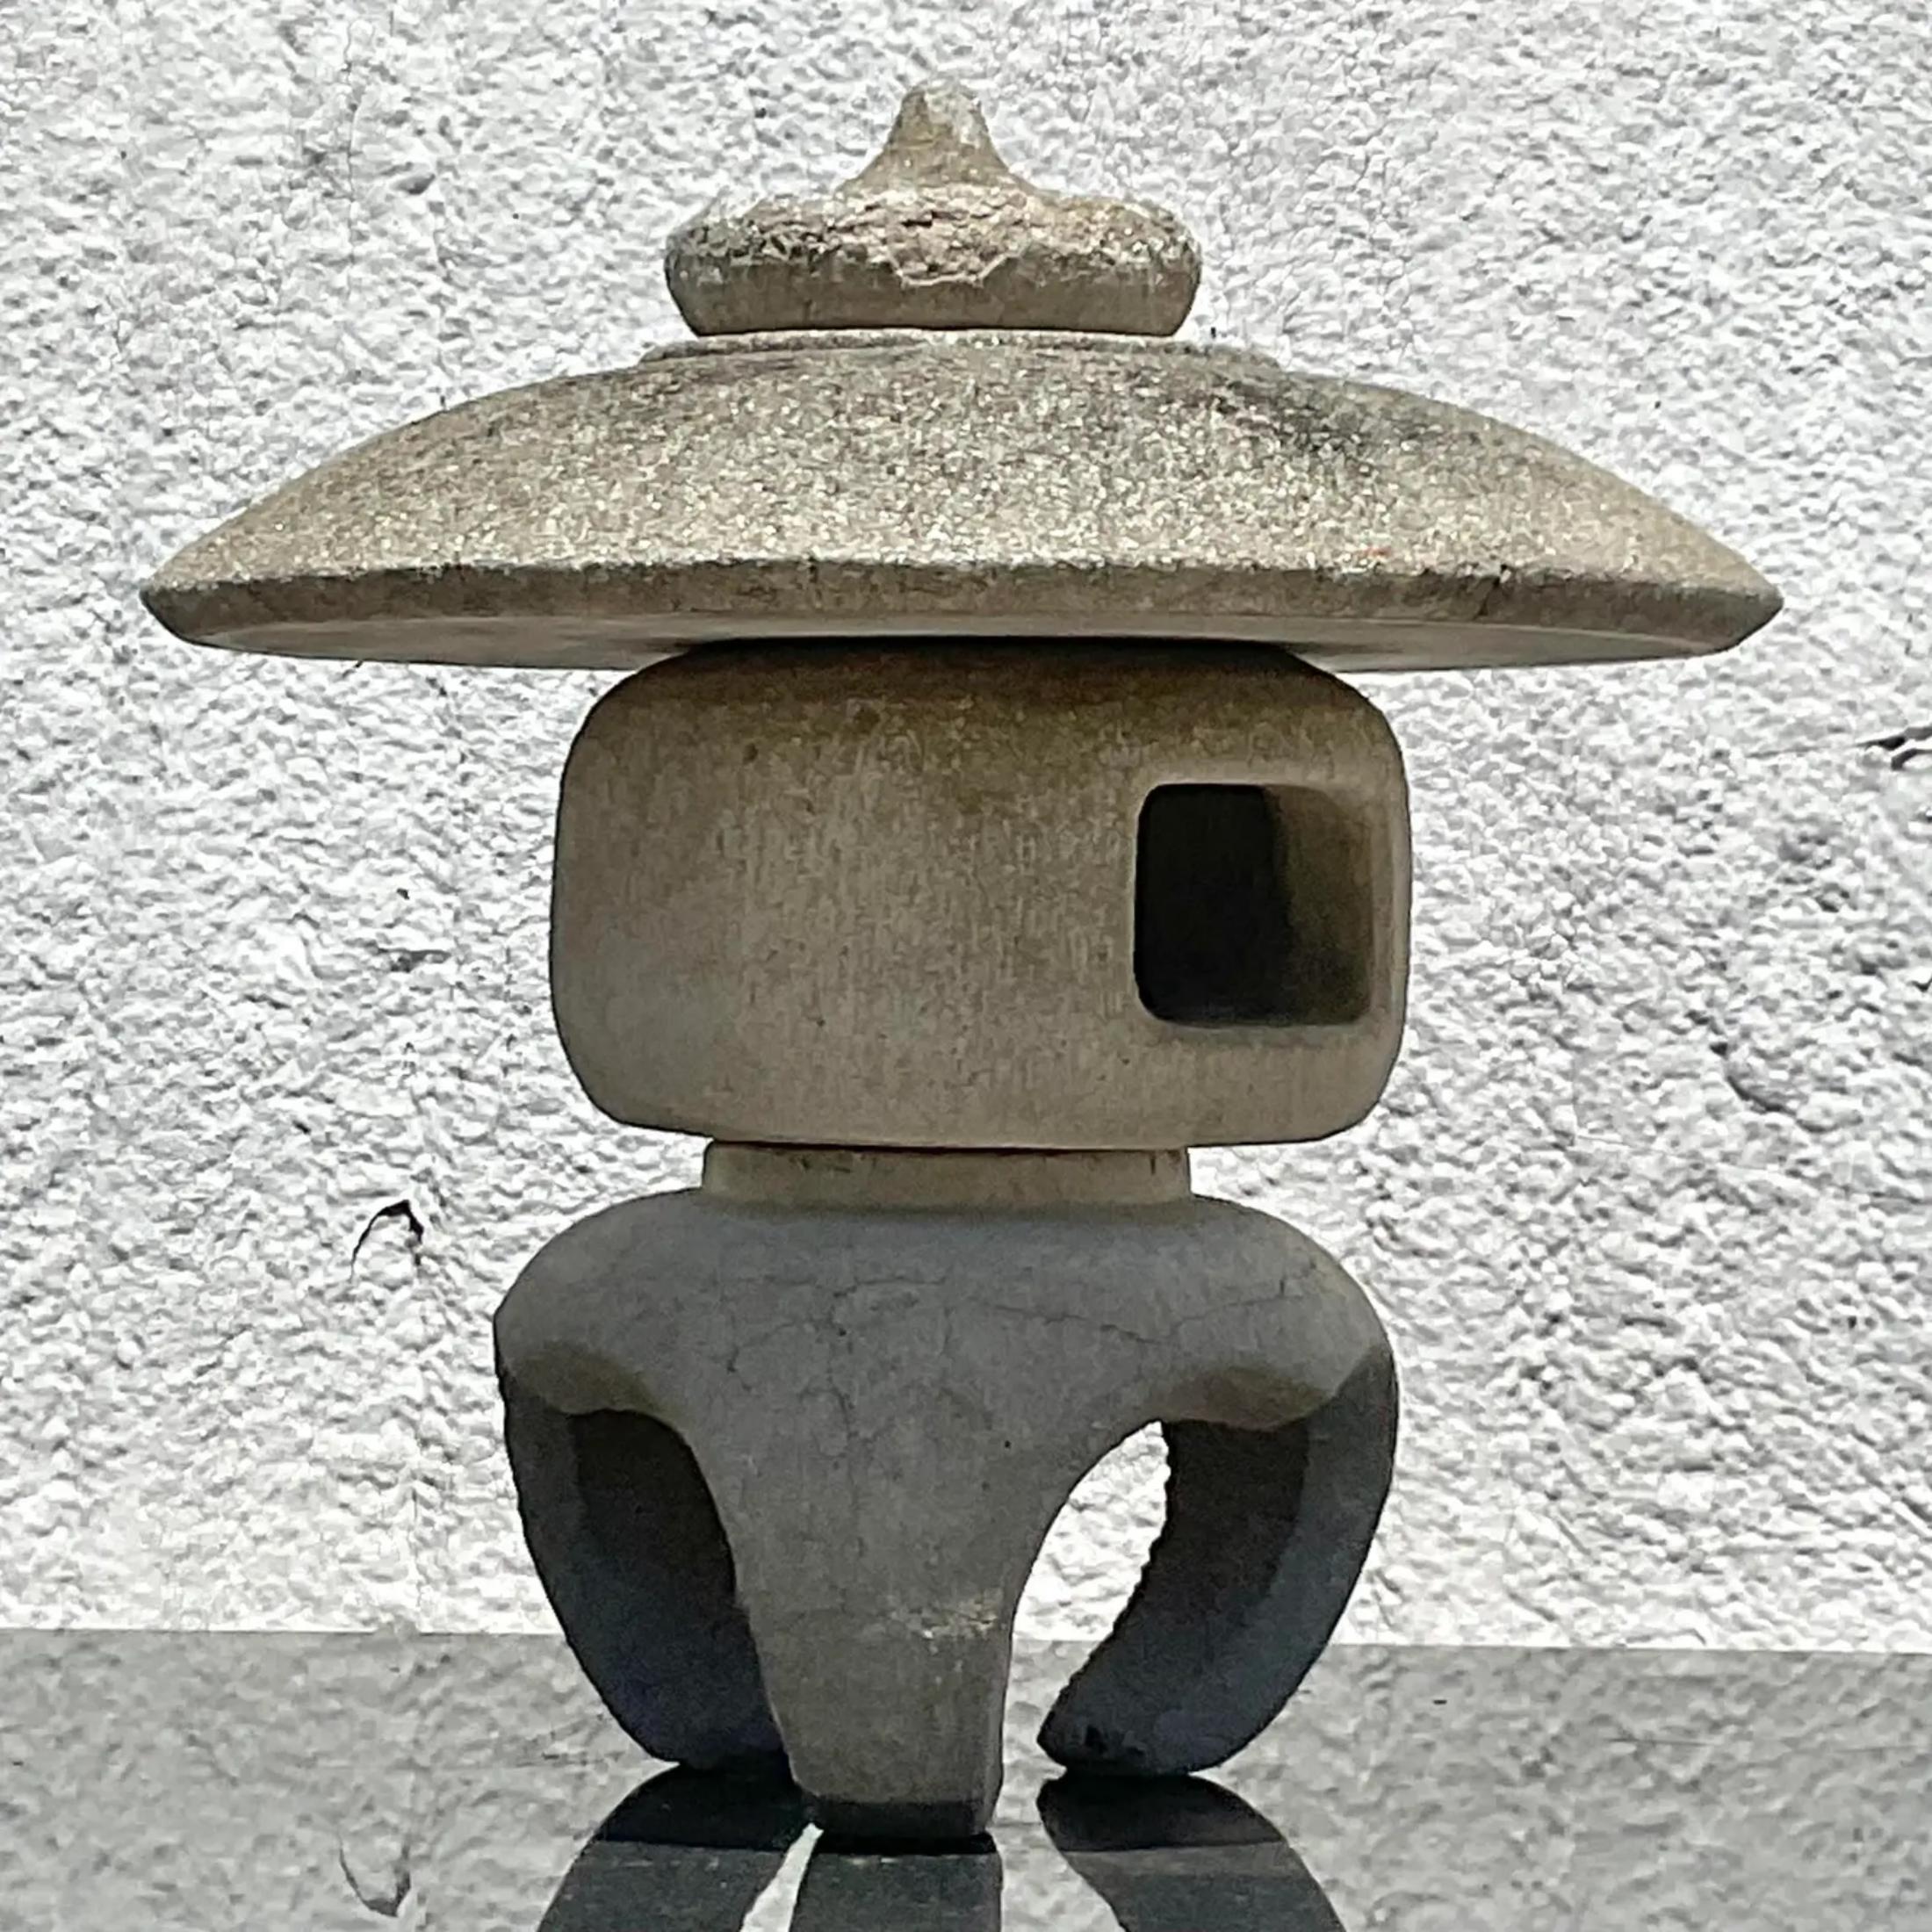 A fantastic vintage concrete garden ornament. A chic Asian pagoda in a clean and sleek design. Splits into 4 separate pieces for easy movement. Acquired from a Palm Beach estate